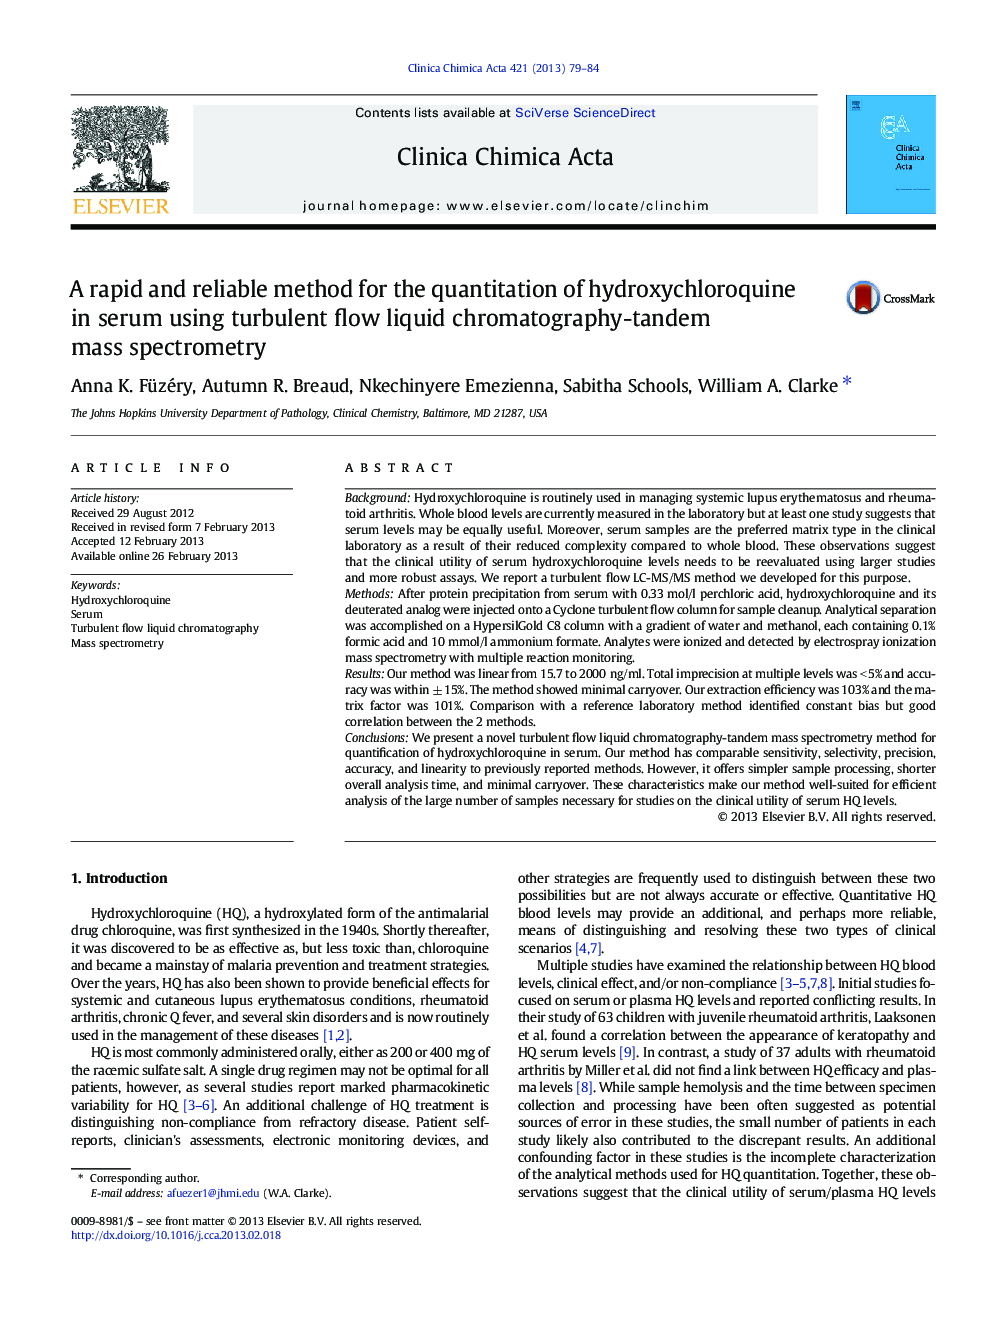 A rapid and reliable method for the quantitation of hydroxychloroquine in serum using turbulent flow liquid chromatography-tandem mass spectrometry